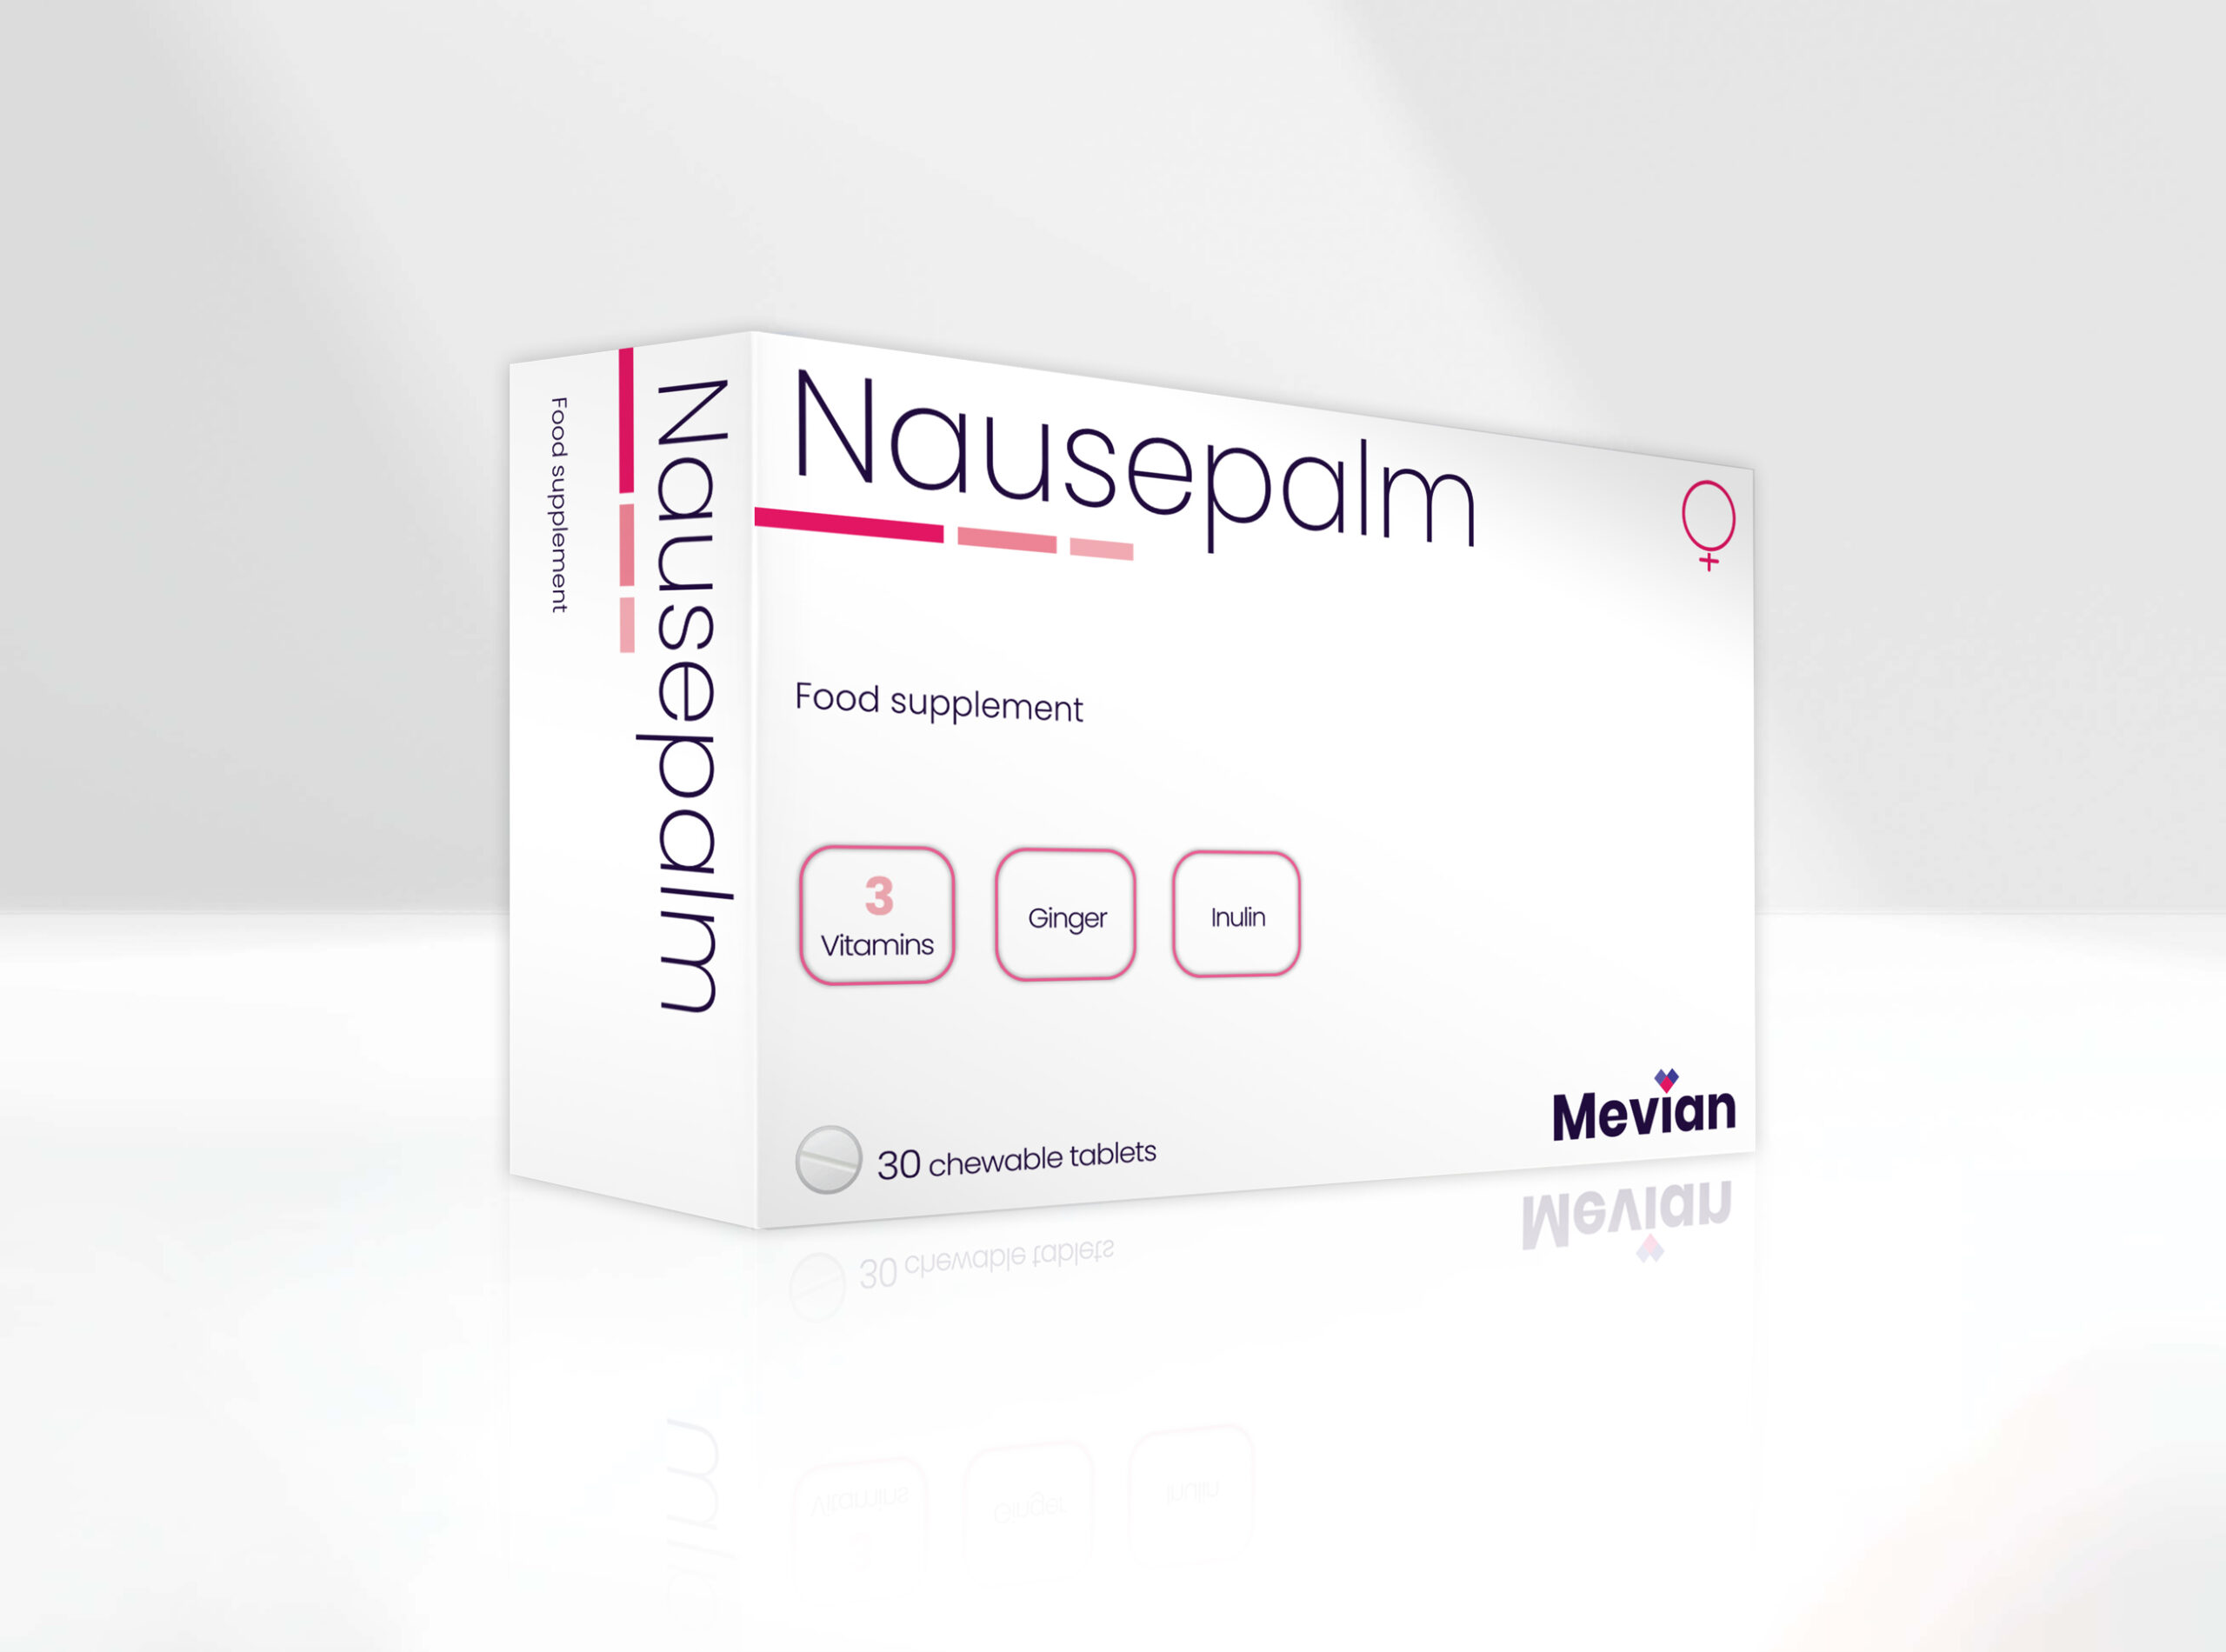 ''Nausepalm is indicated for the treatment of nausea and vomiting and to promote digestive function, regular gastric motility, and elimination of gas.''